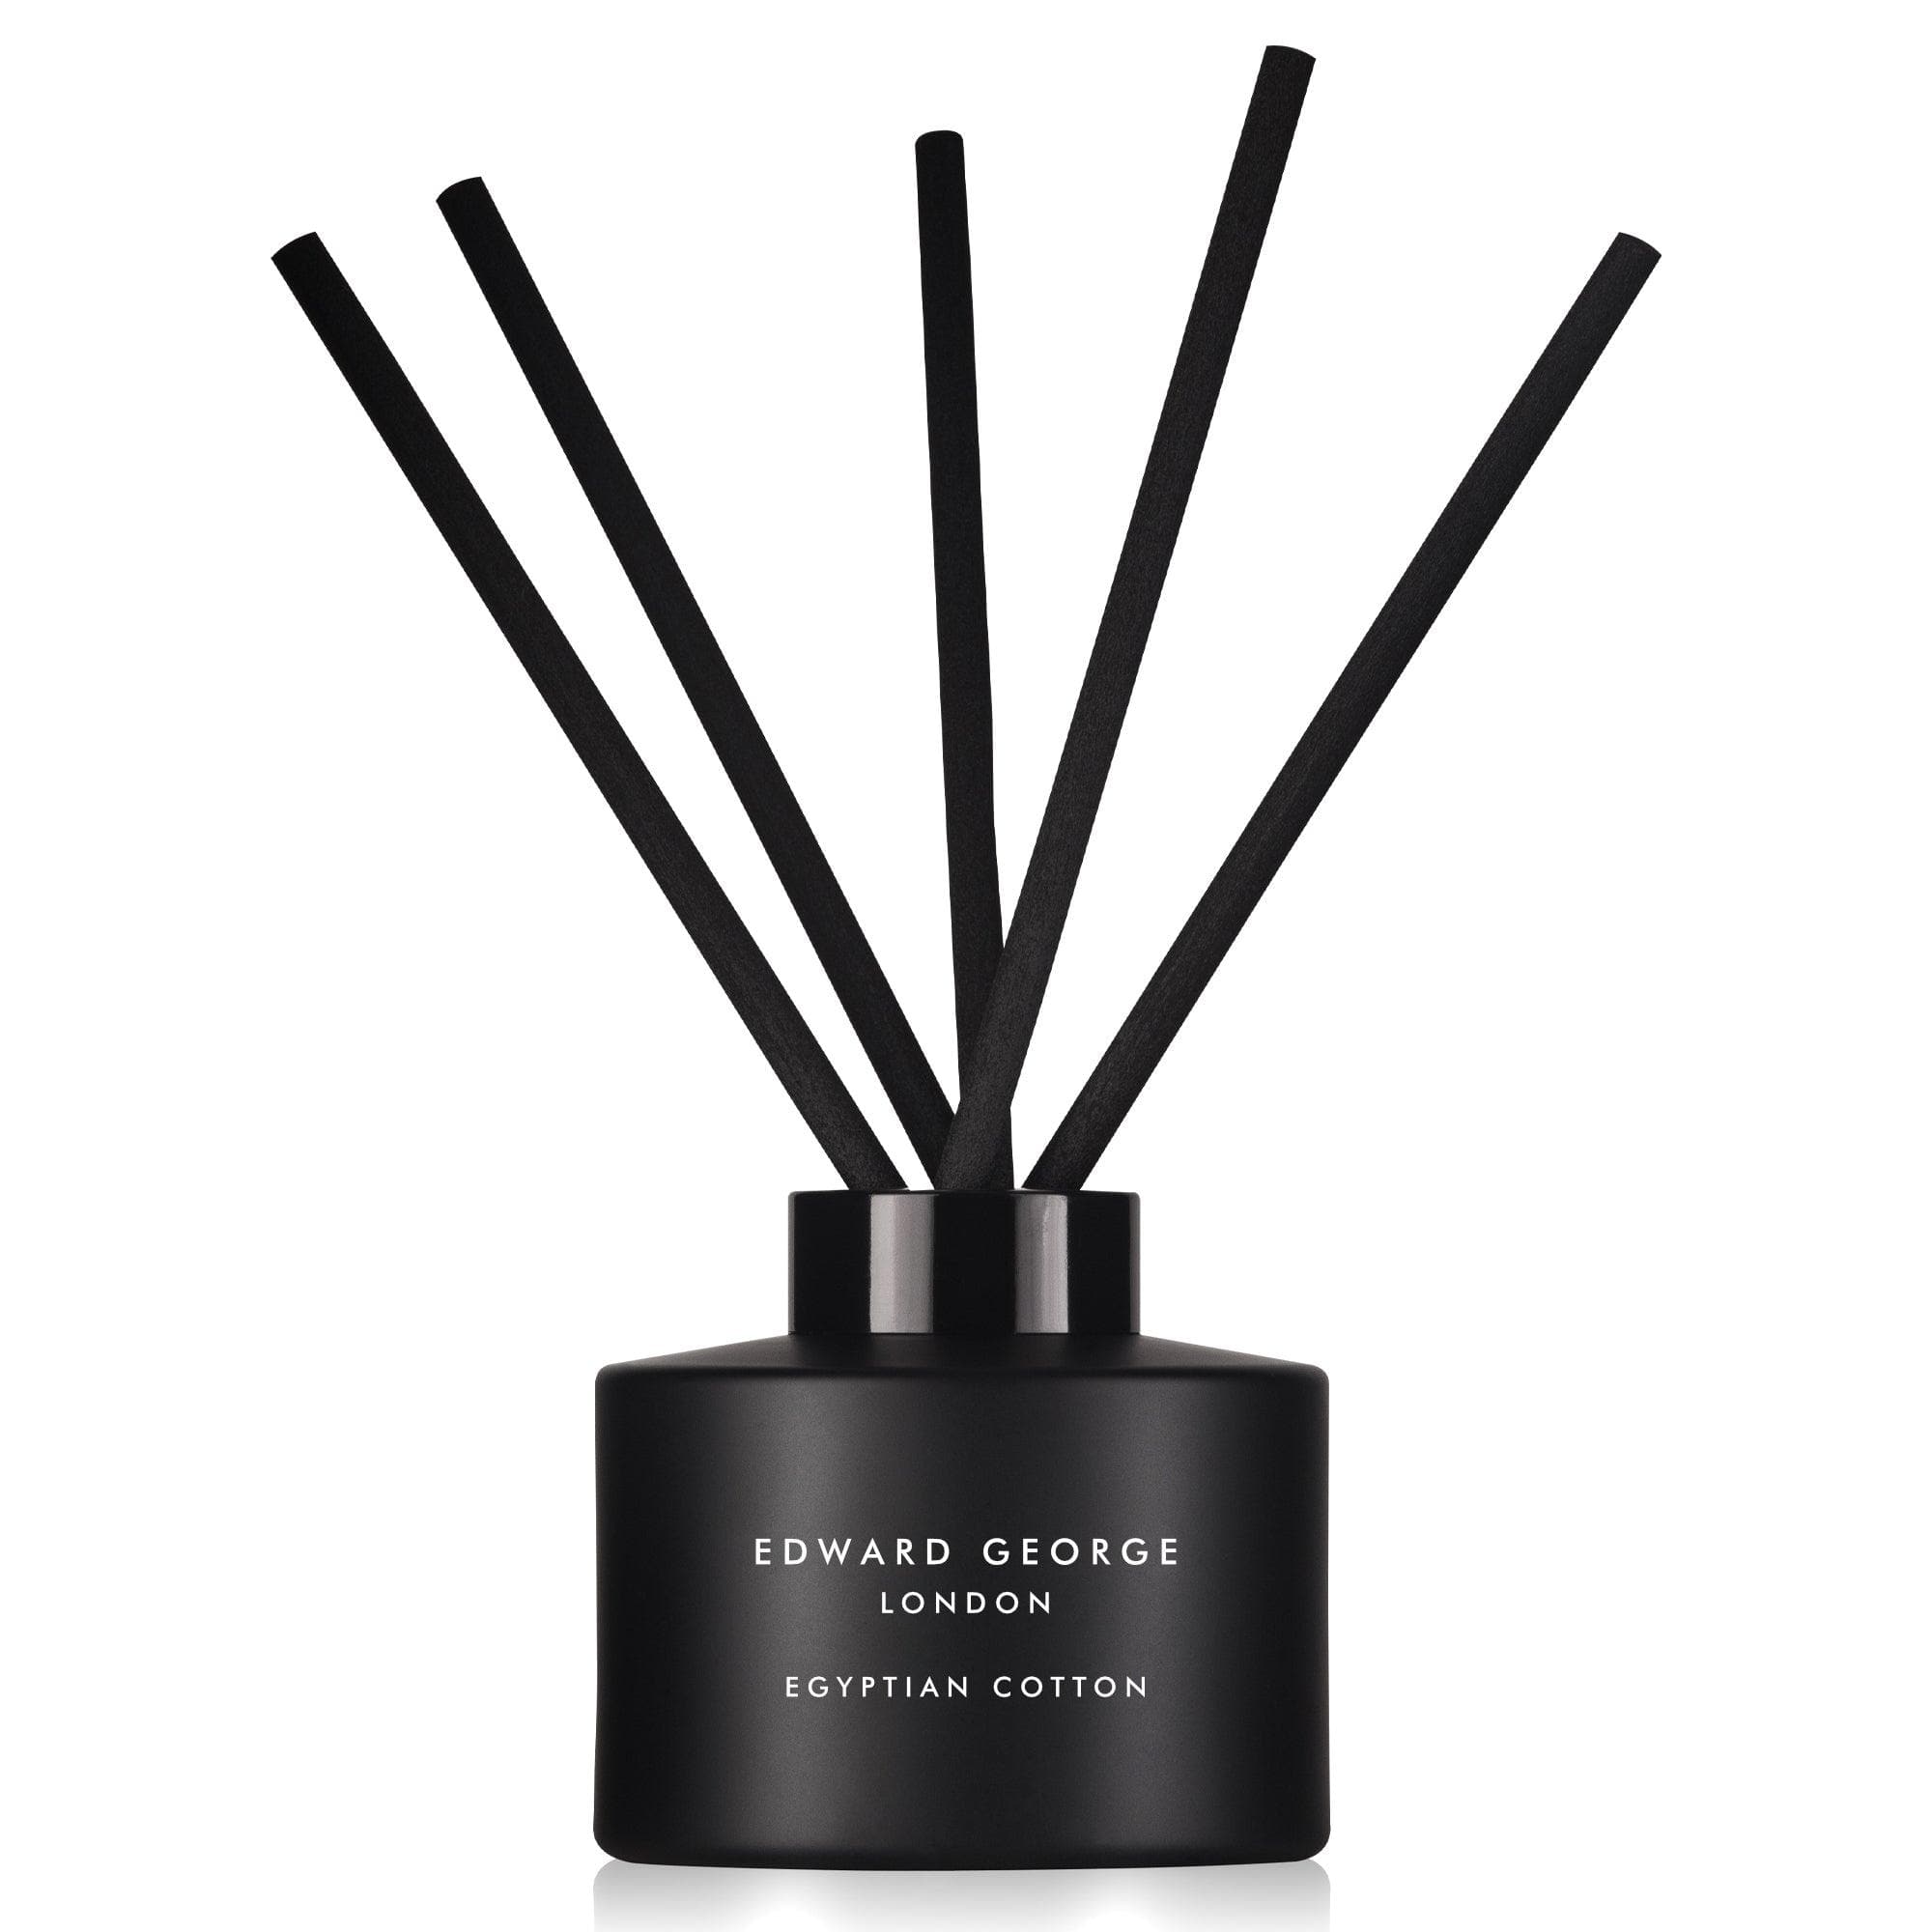 egyptian cotton reed diffusers refills home fragrance decor room edward george london infographic luxury gift ritual scented england sticks scent oil diffuser refill women men black